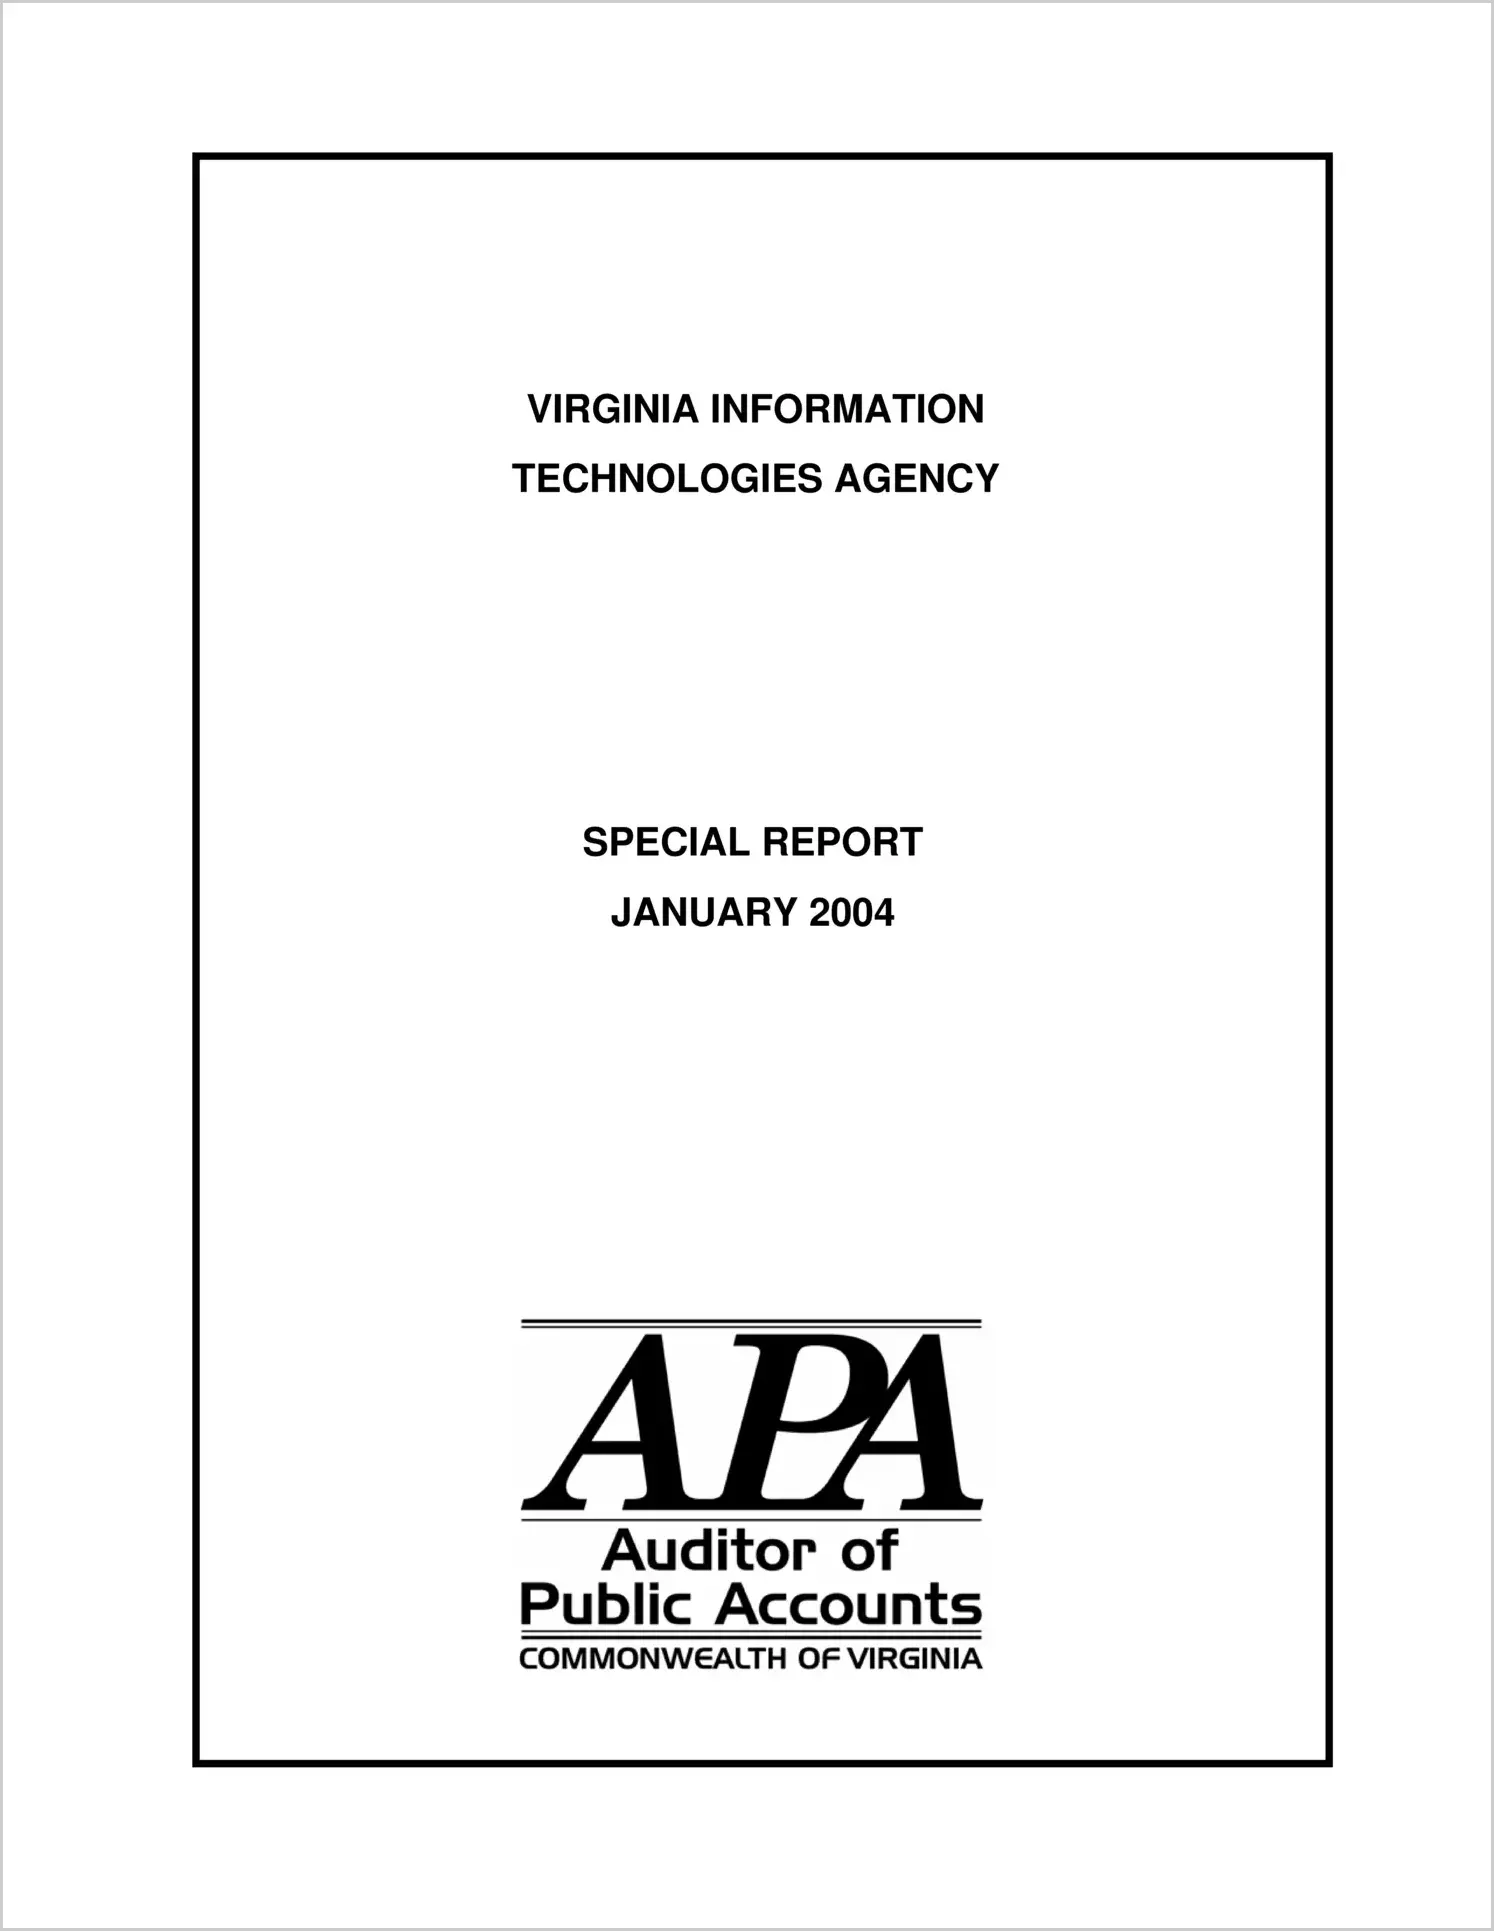 Special ReportVirginia Information Technologies Agency(Report Date: 12/15/2003)